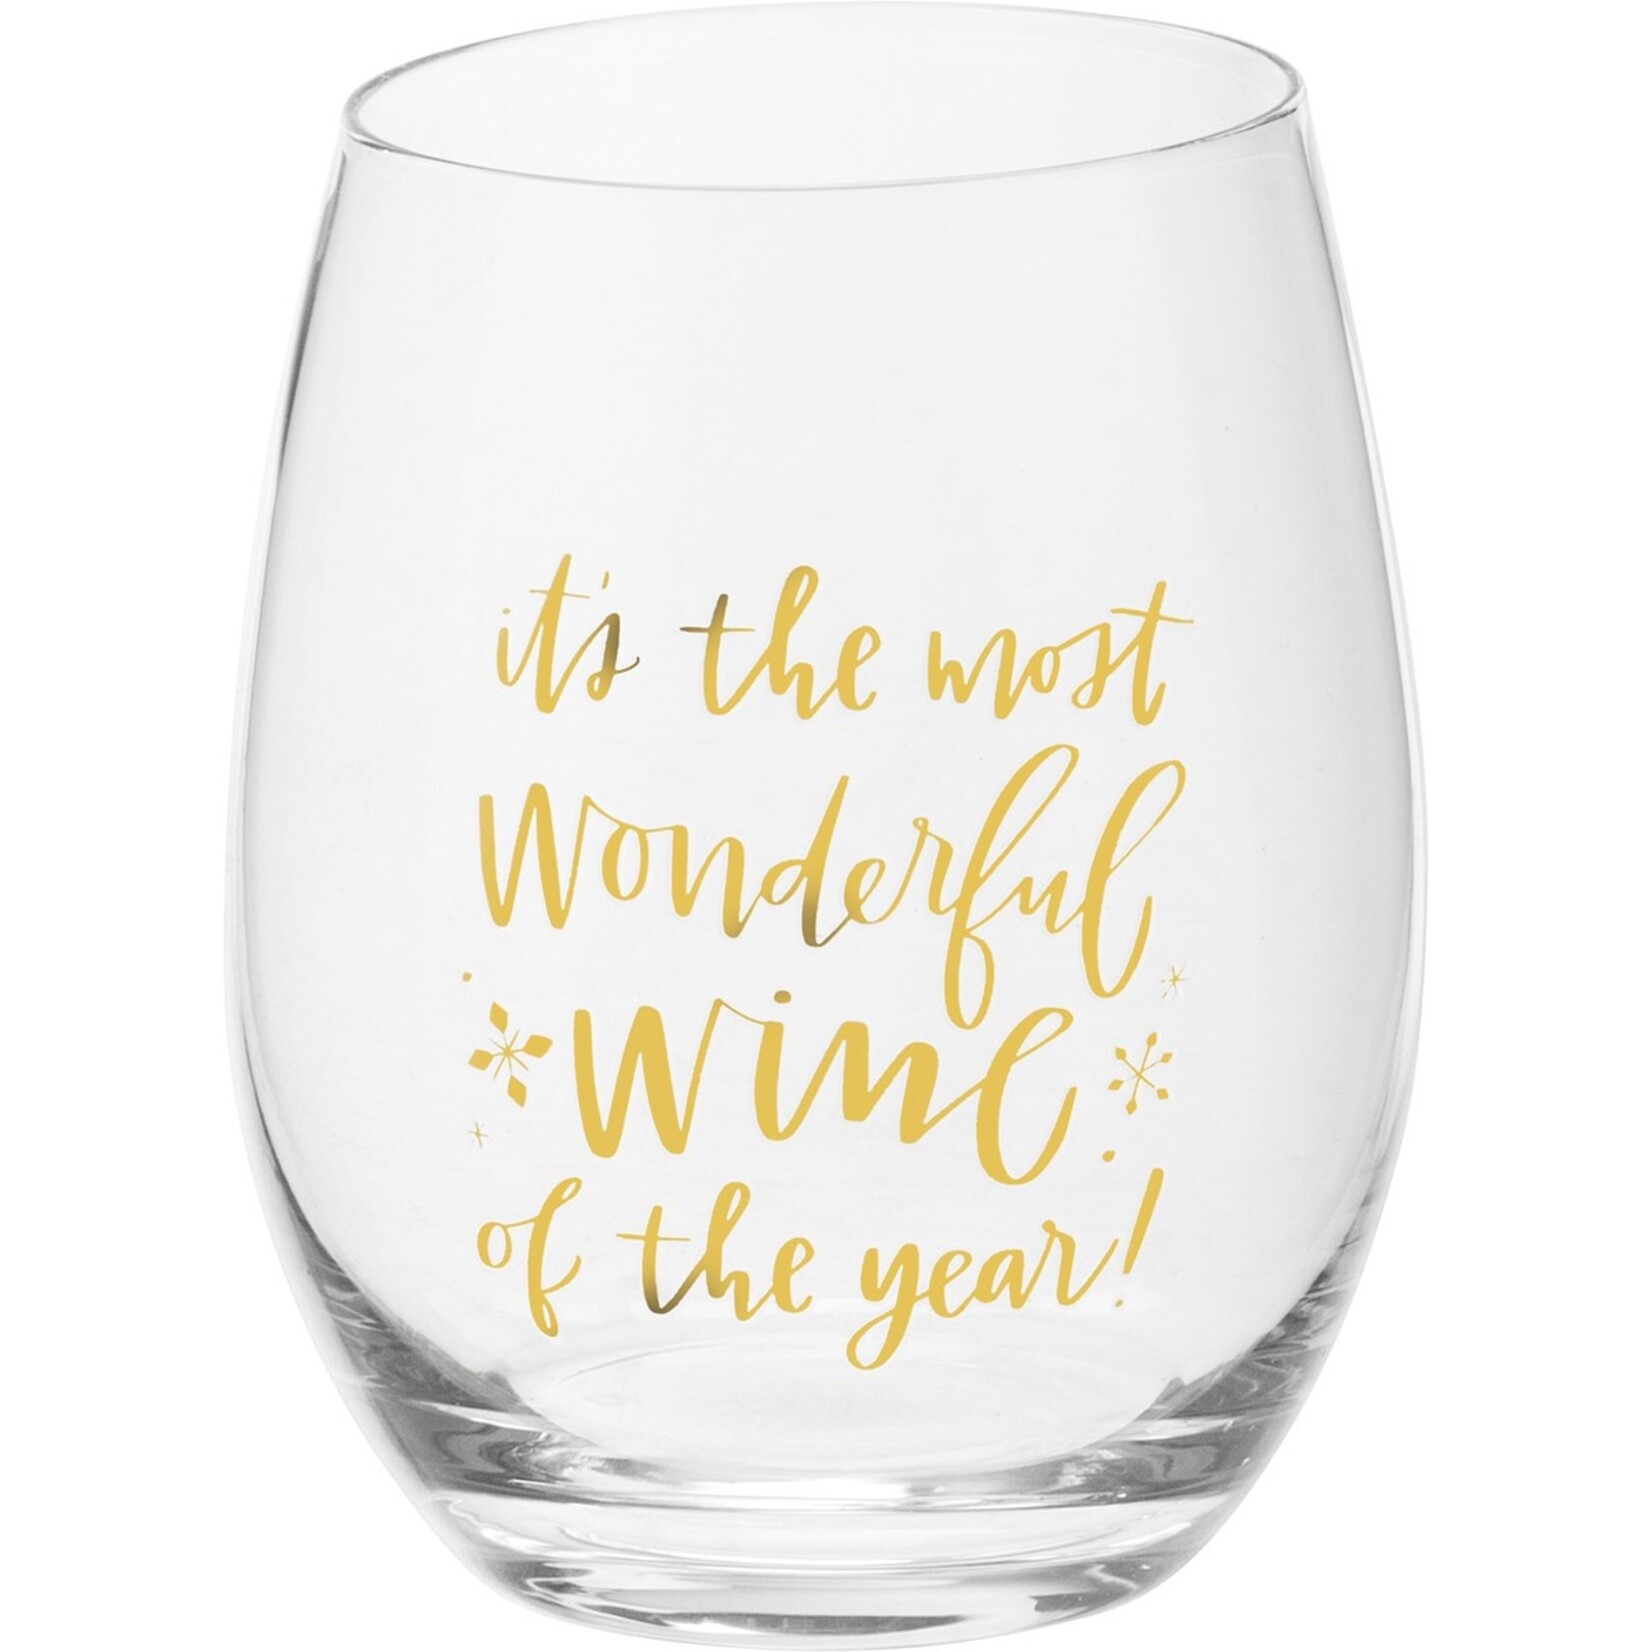 Primitives by Kathy Primitives by Kathy- Most Wonderful Wine Of The Year Wine Glass